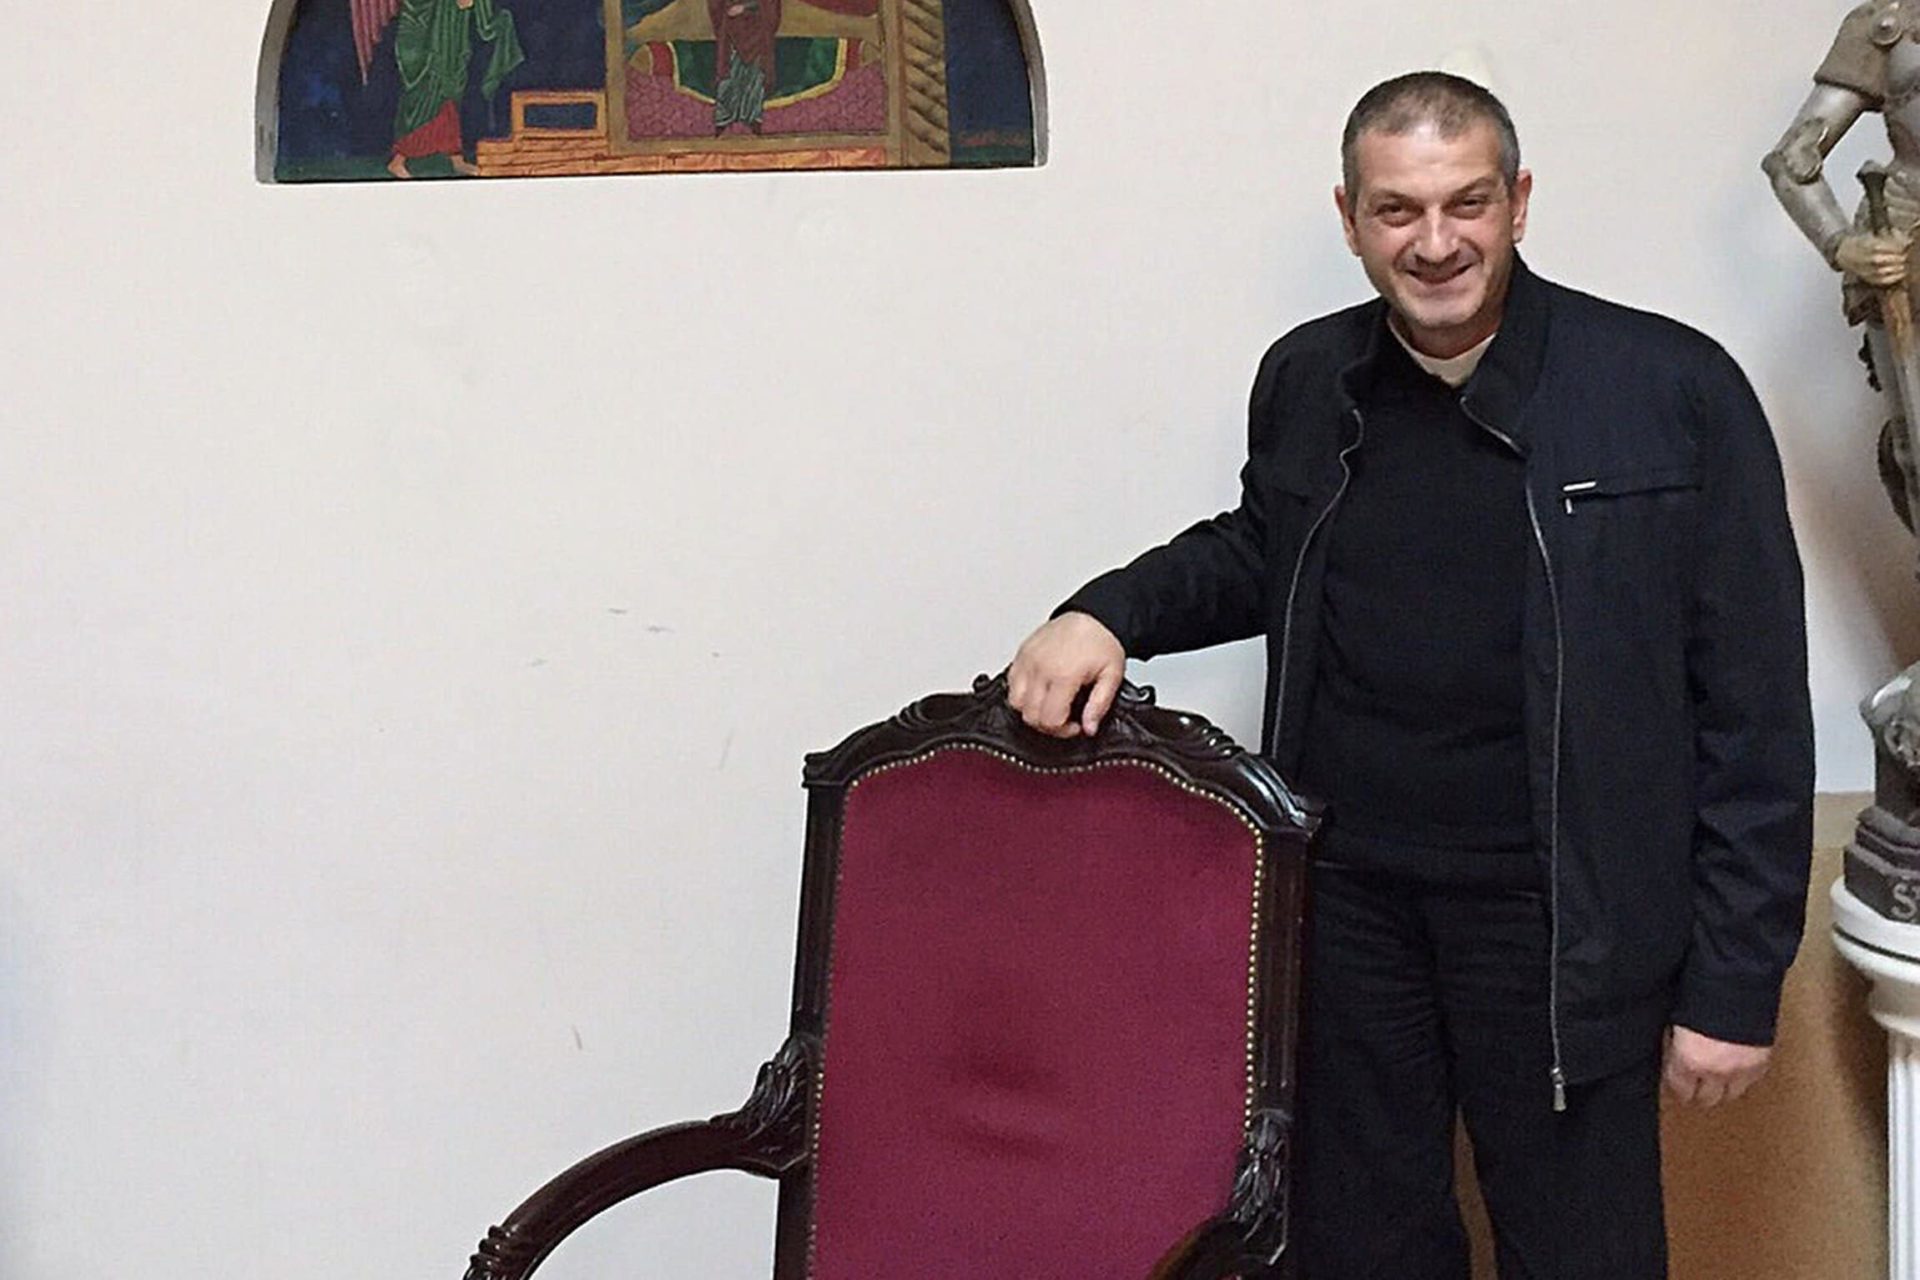 Fr Jacques Mourad poses for a photo on 11 November in the reception area at Our Lady of the Annunciation Church in Beirut, Lebanon. Photo: Doreen Abi Raad/CNS